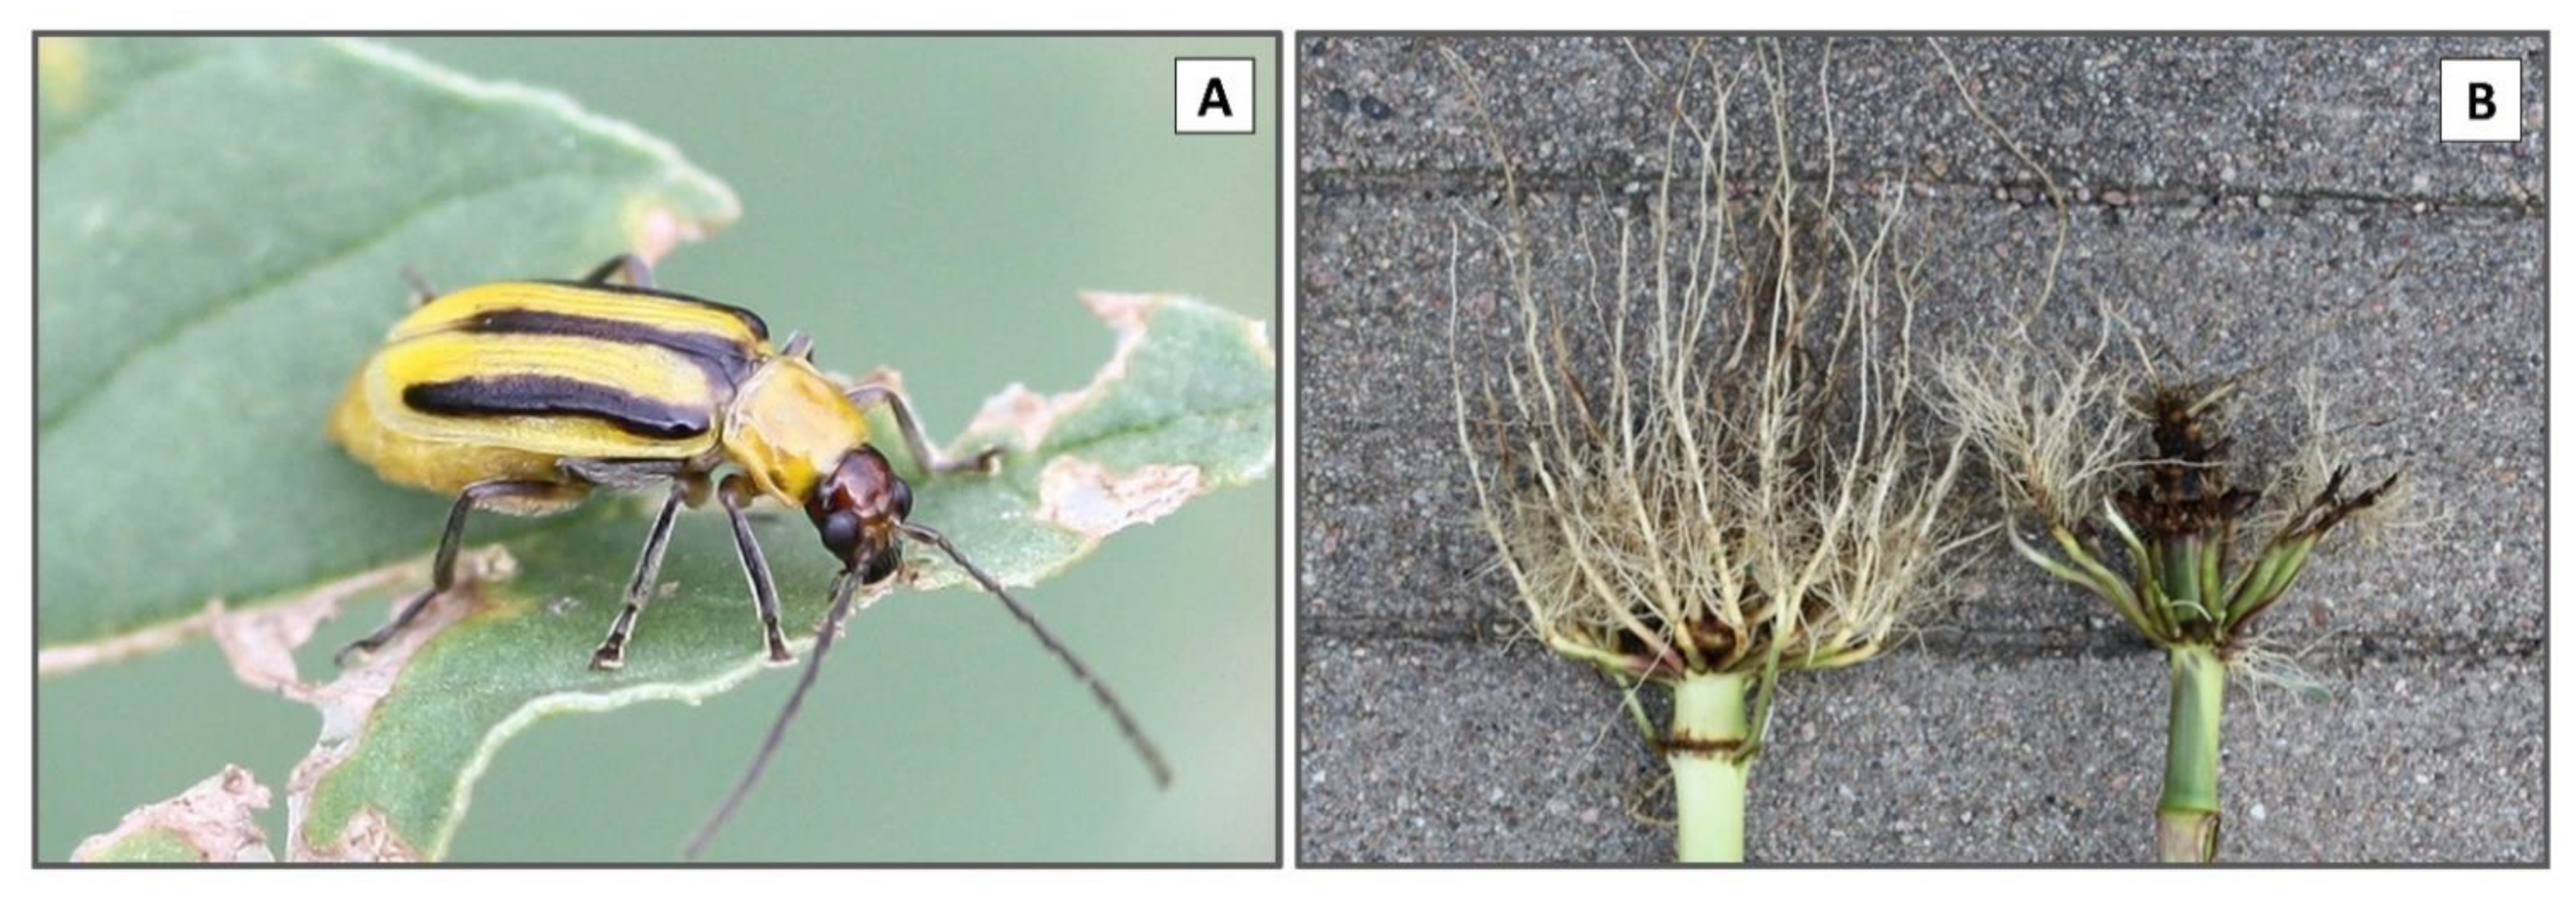 Insects Free Full-Text The Use of Insecticides to Manage the Western Corn Rootworm, Diabrotica virgifera virgifera, LeConte History, Field-Evolved Resistance, and Associated Mechanisms picture photo